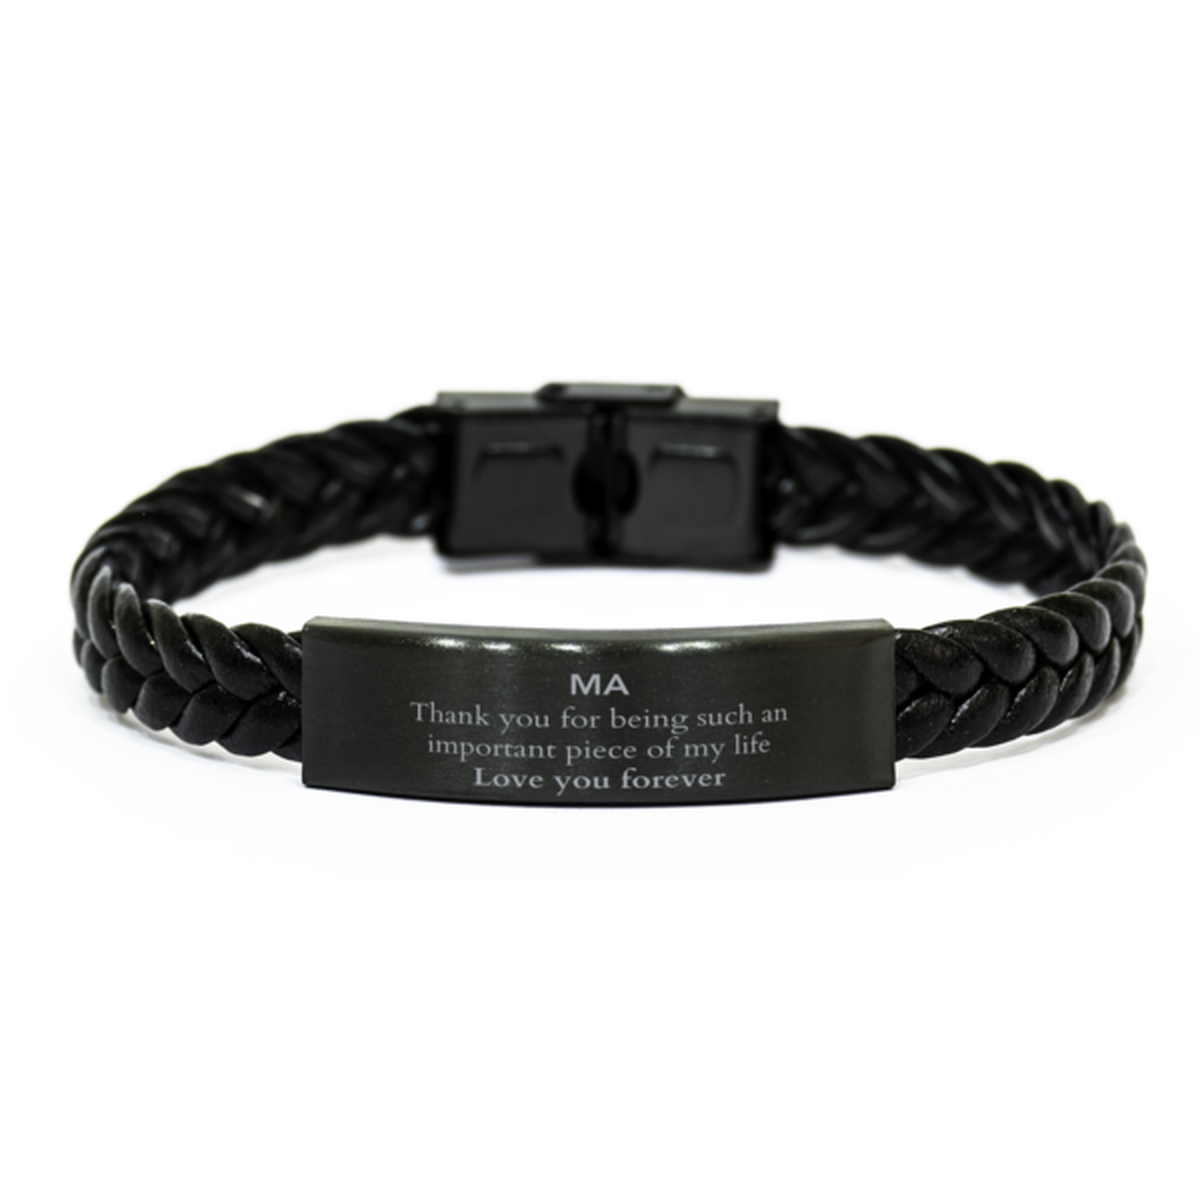 Appropriate Ma Braided Leather Bracelet Epic Birthday Gifts for Ma Thank you for being such an important piece of my life Ma Christmas Mothers Fathers Day